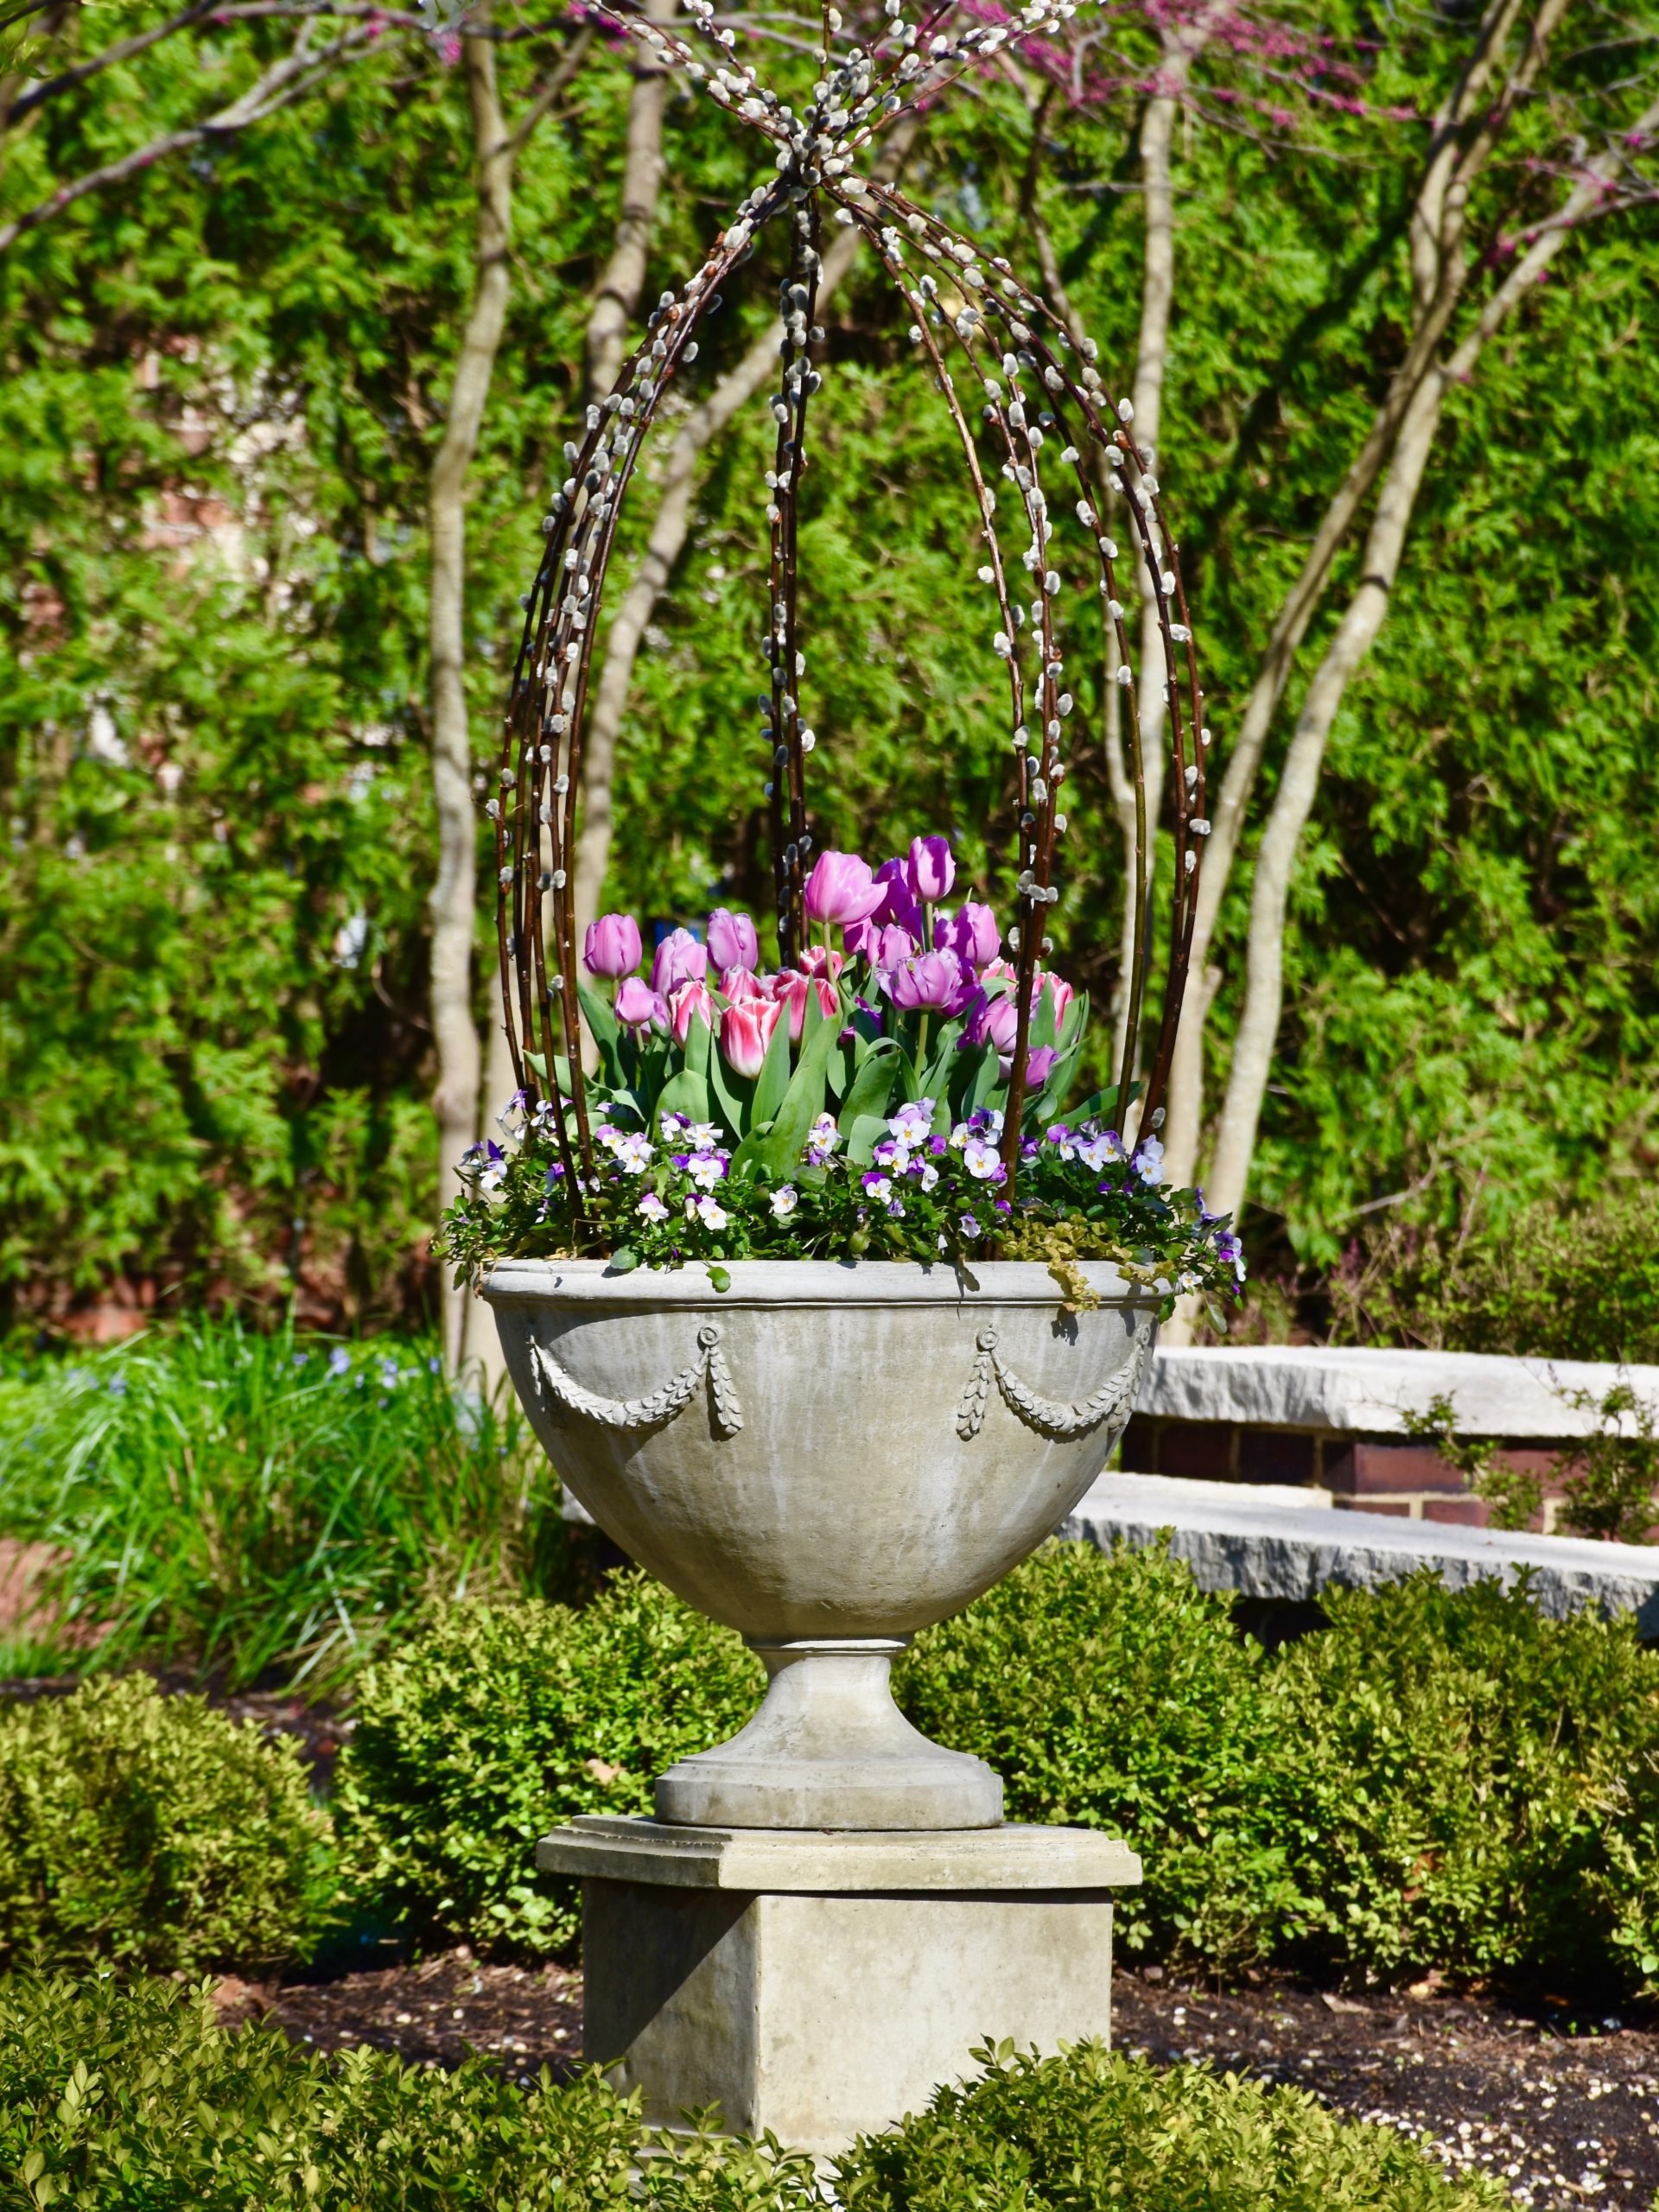 How to Plant Tulips in Pots - FineGardening